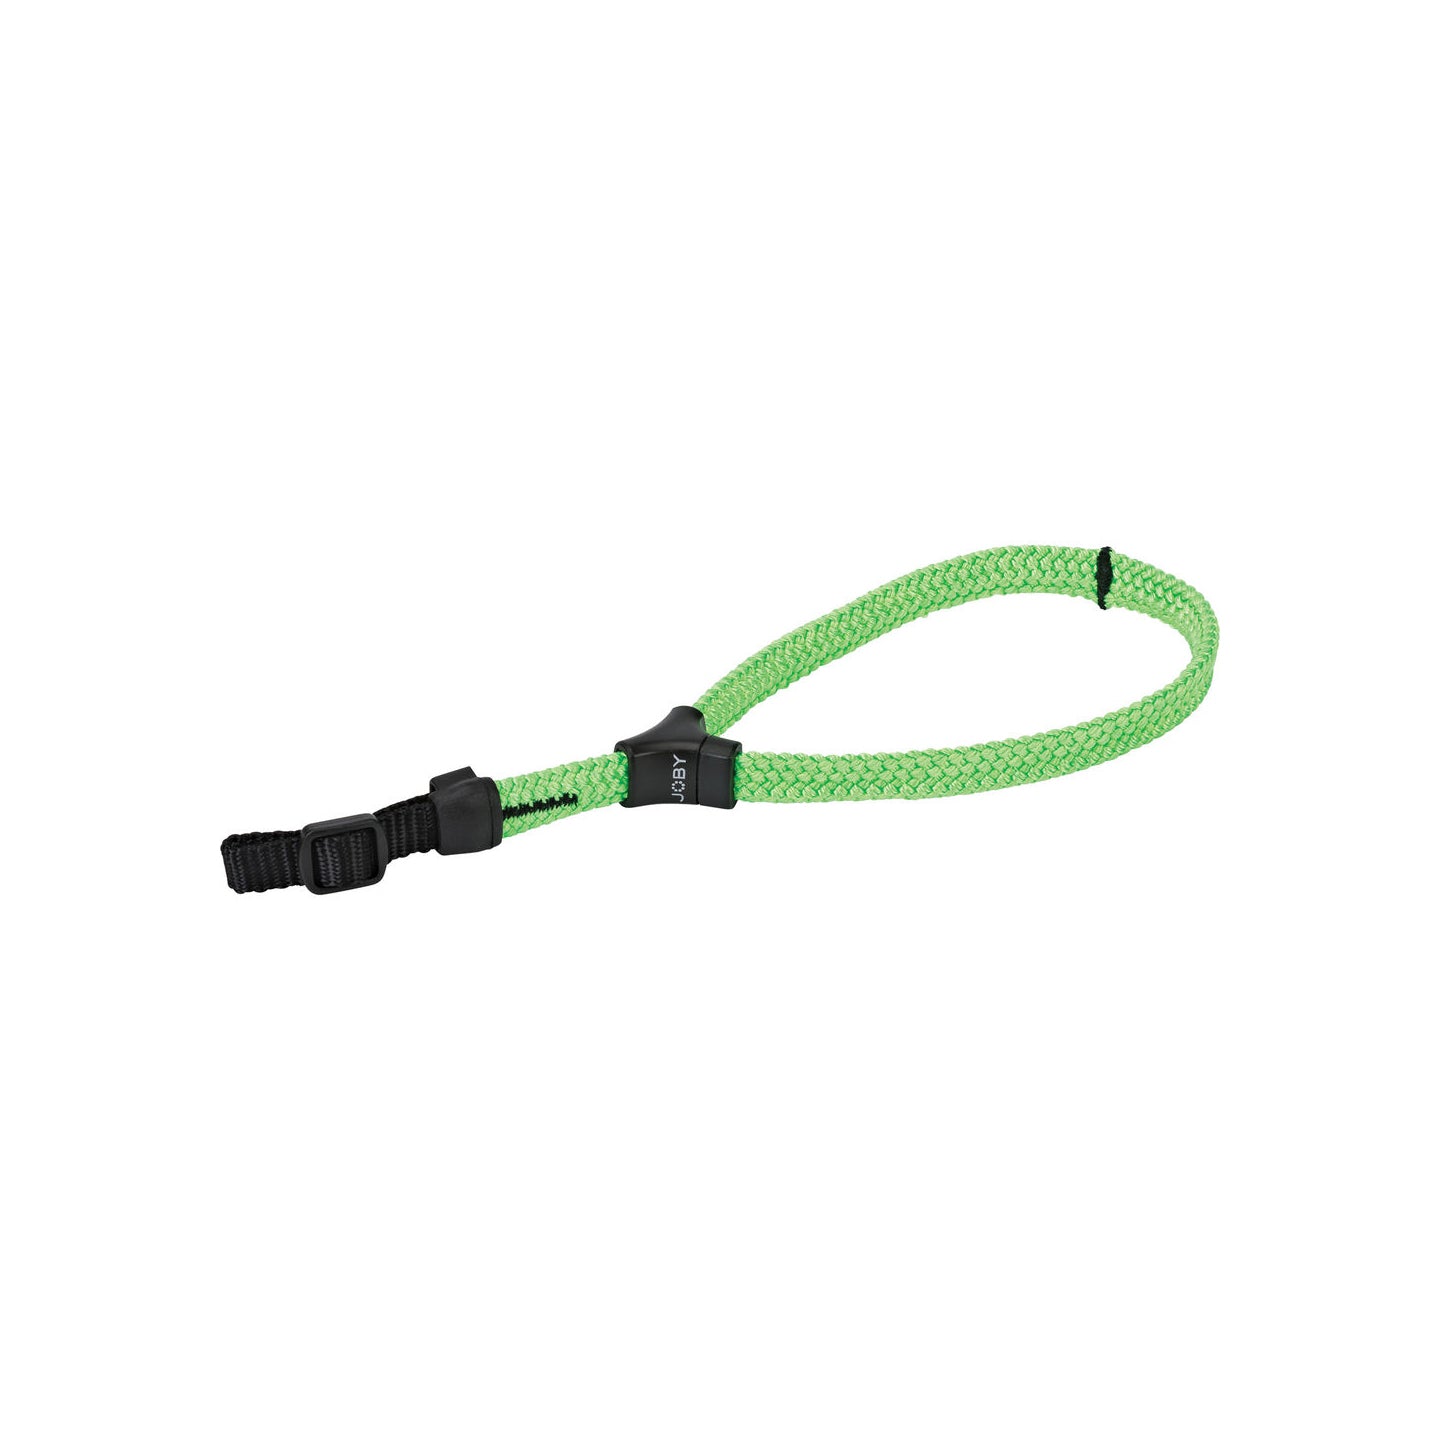 JOBY Camera Wrist Strap Braided Nylon Cord with Adjustable Lock Stopper for DSLR / Mirrorless (Charcoal, Green) | 1271, 1274